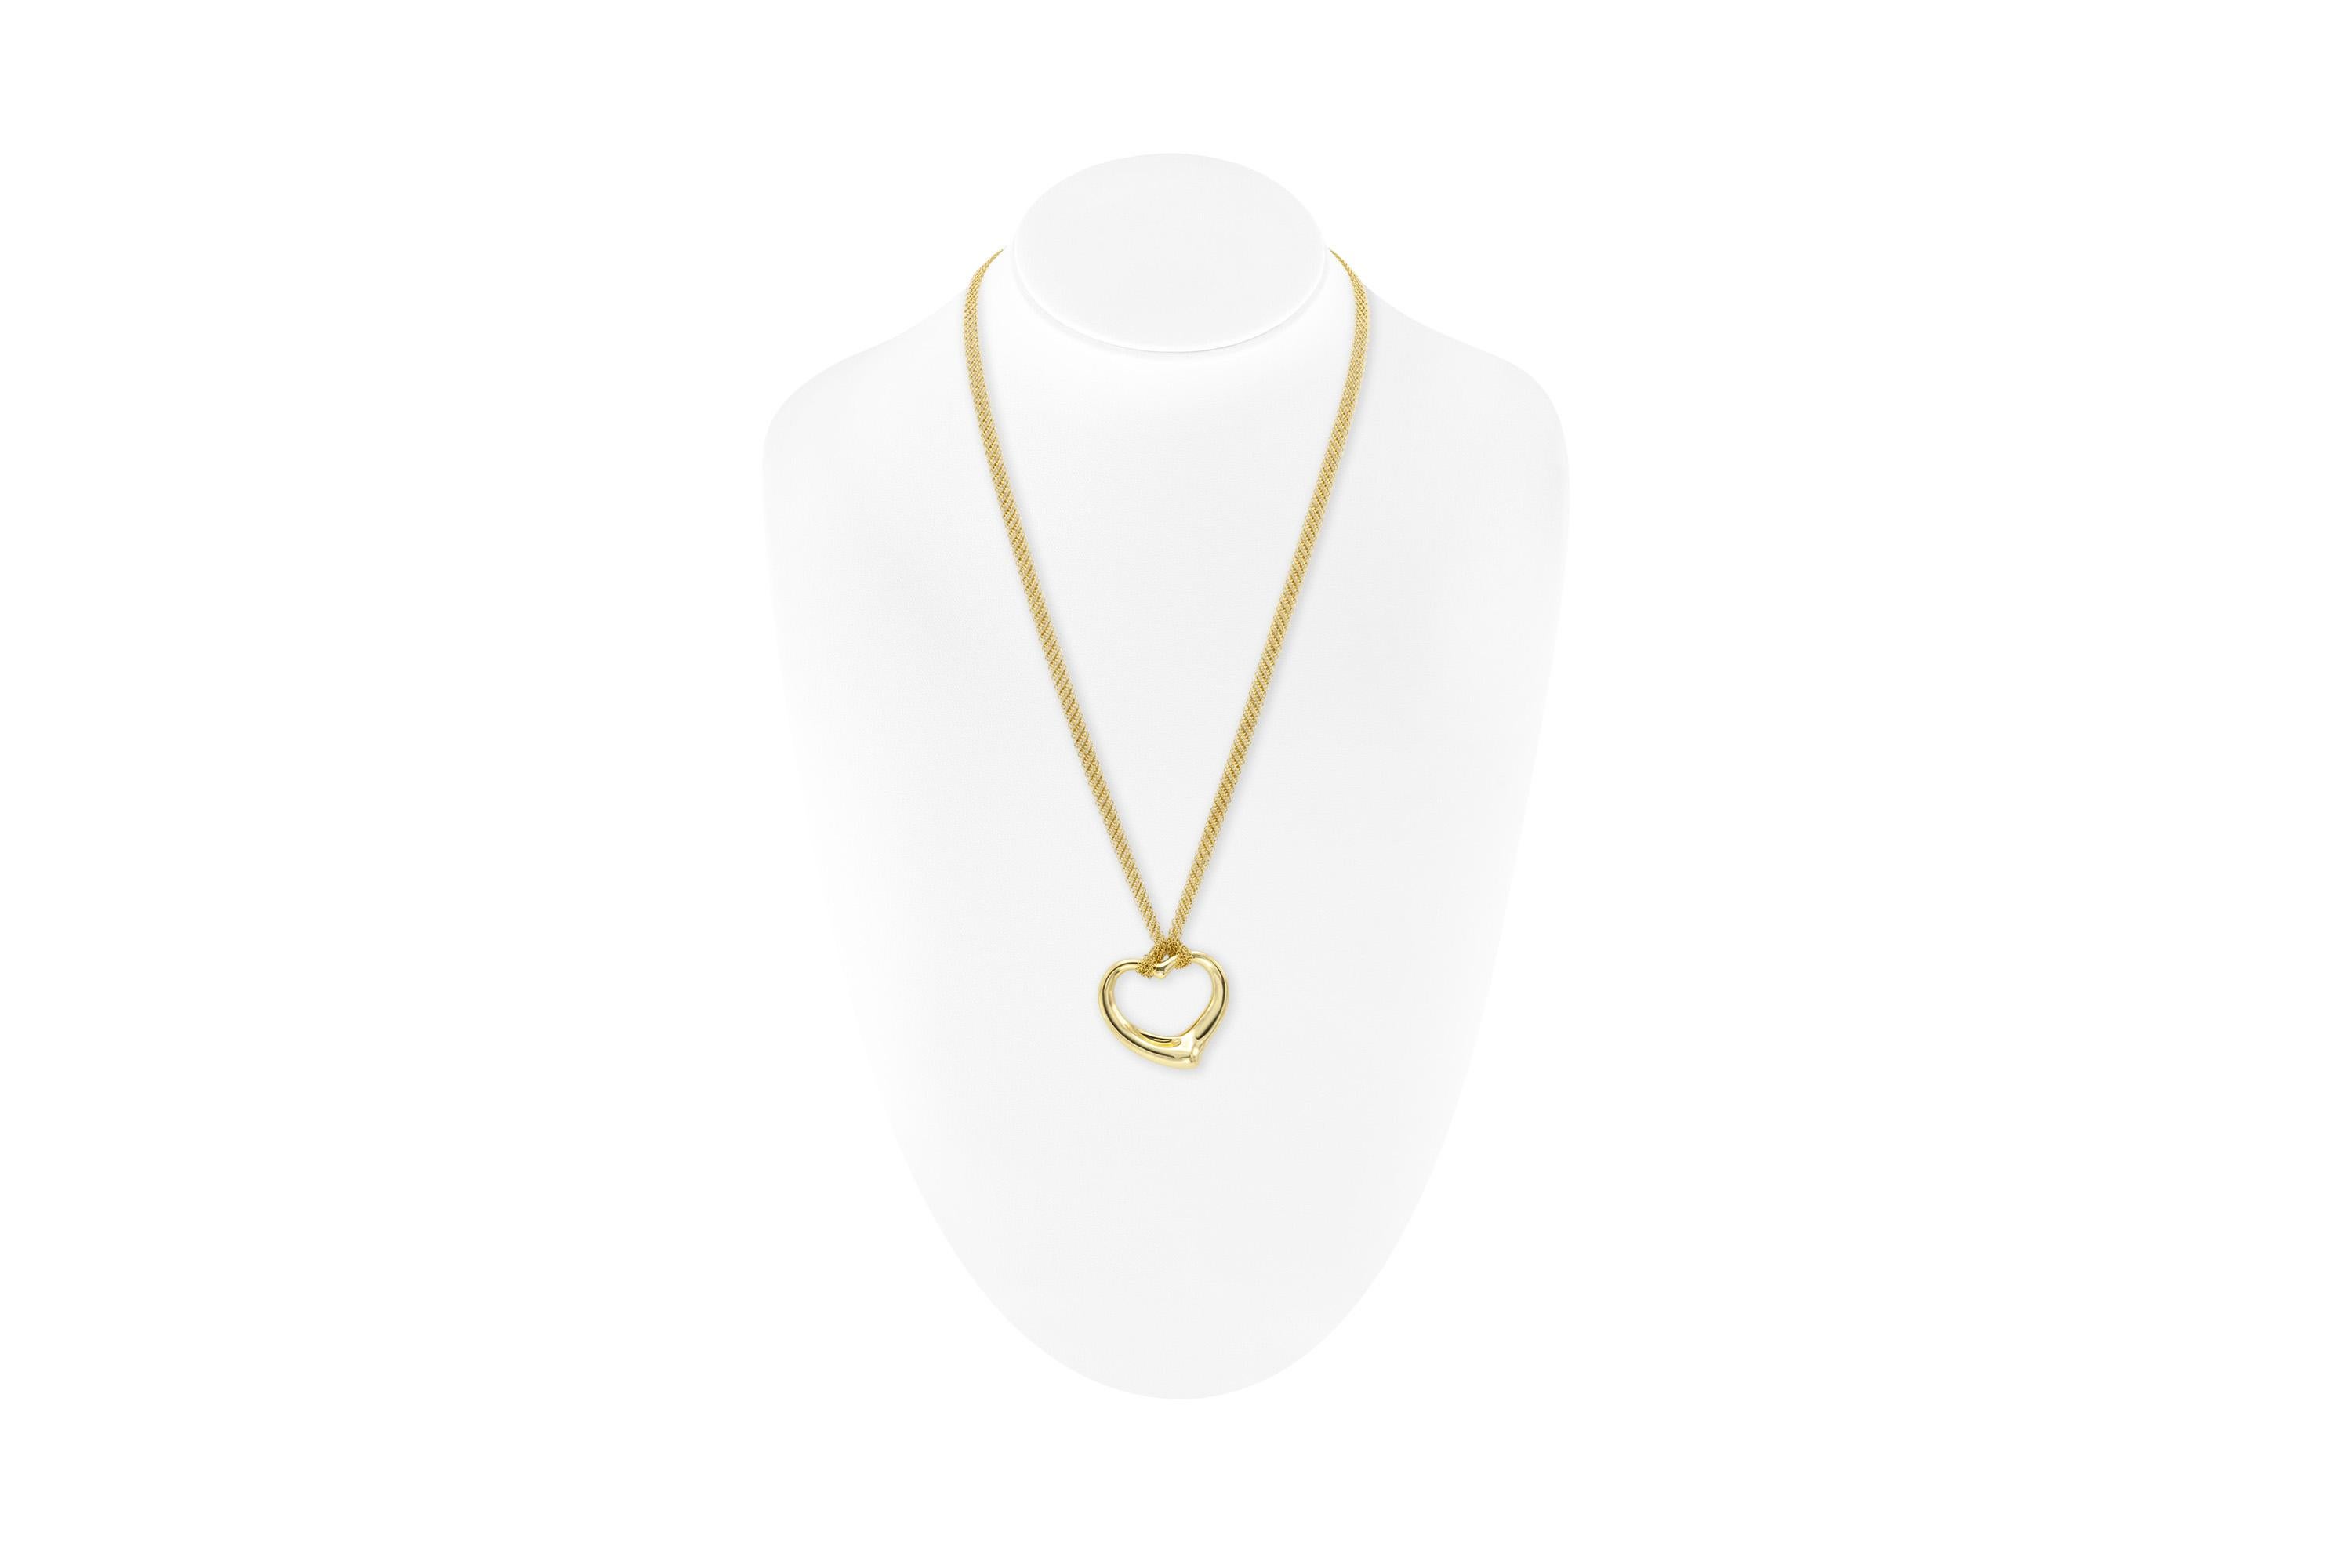 Finely crafted in 18k yellow gold.
Signed by Tiffany & Co. and Elsa Peretti
Made in Spain